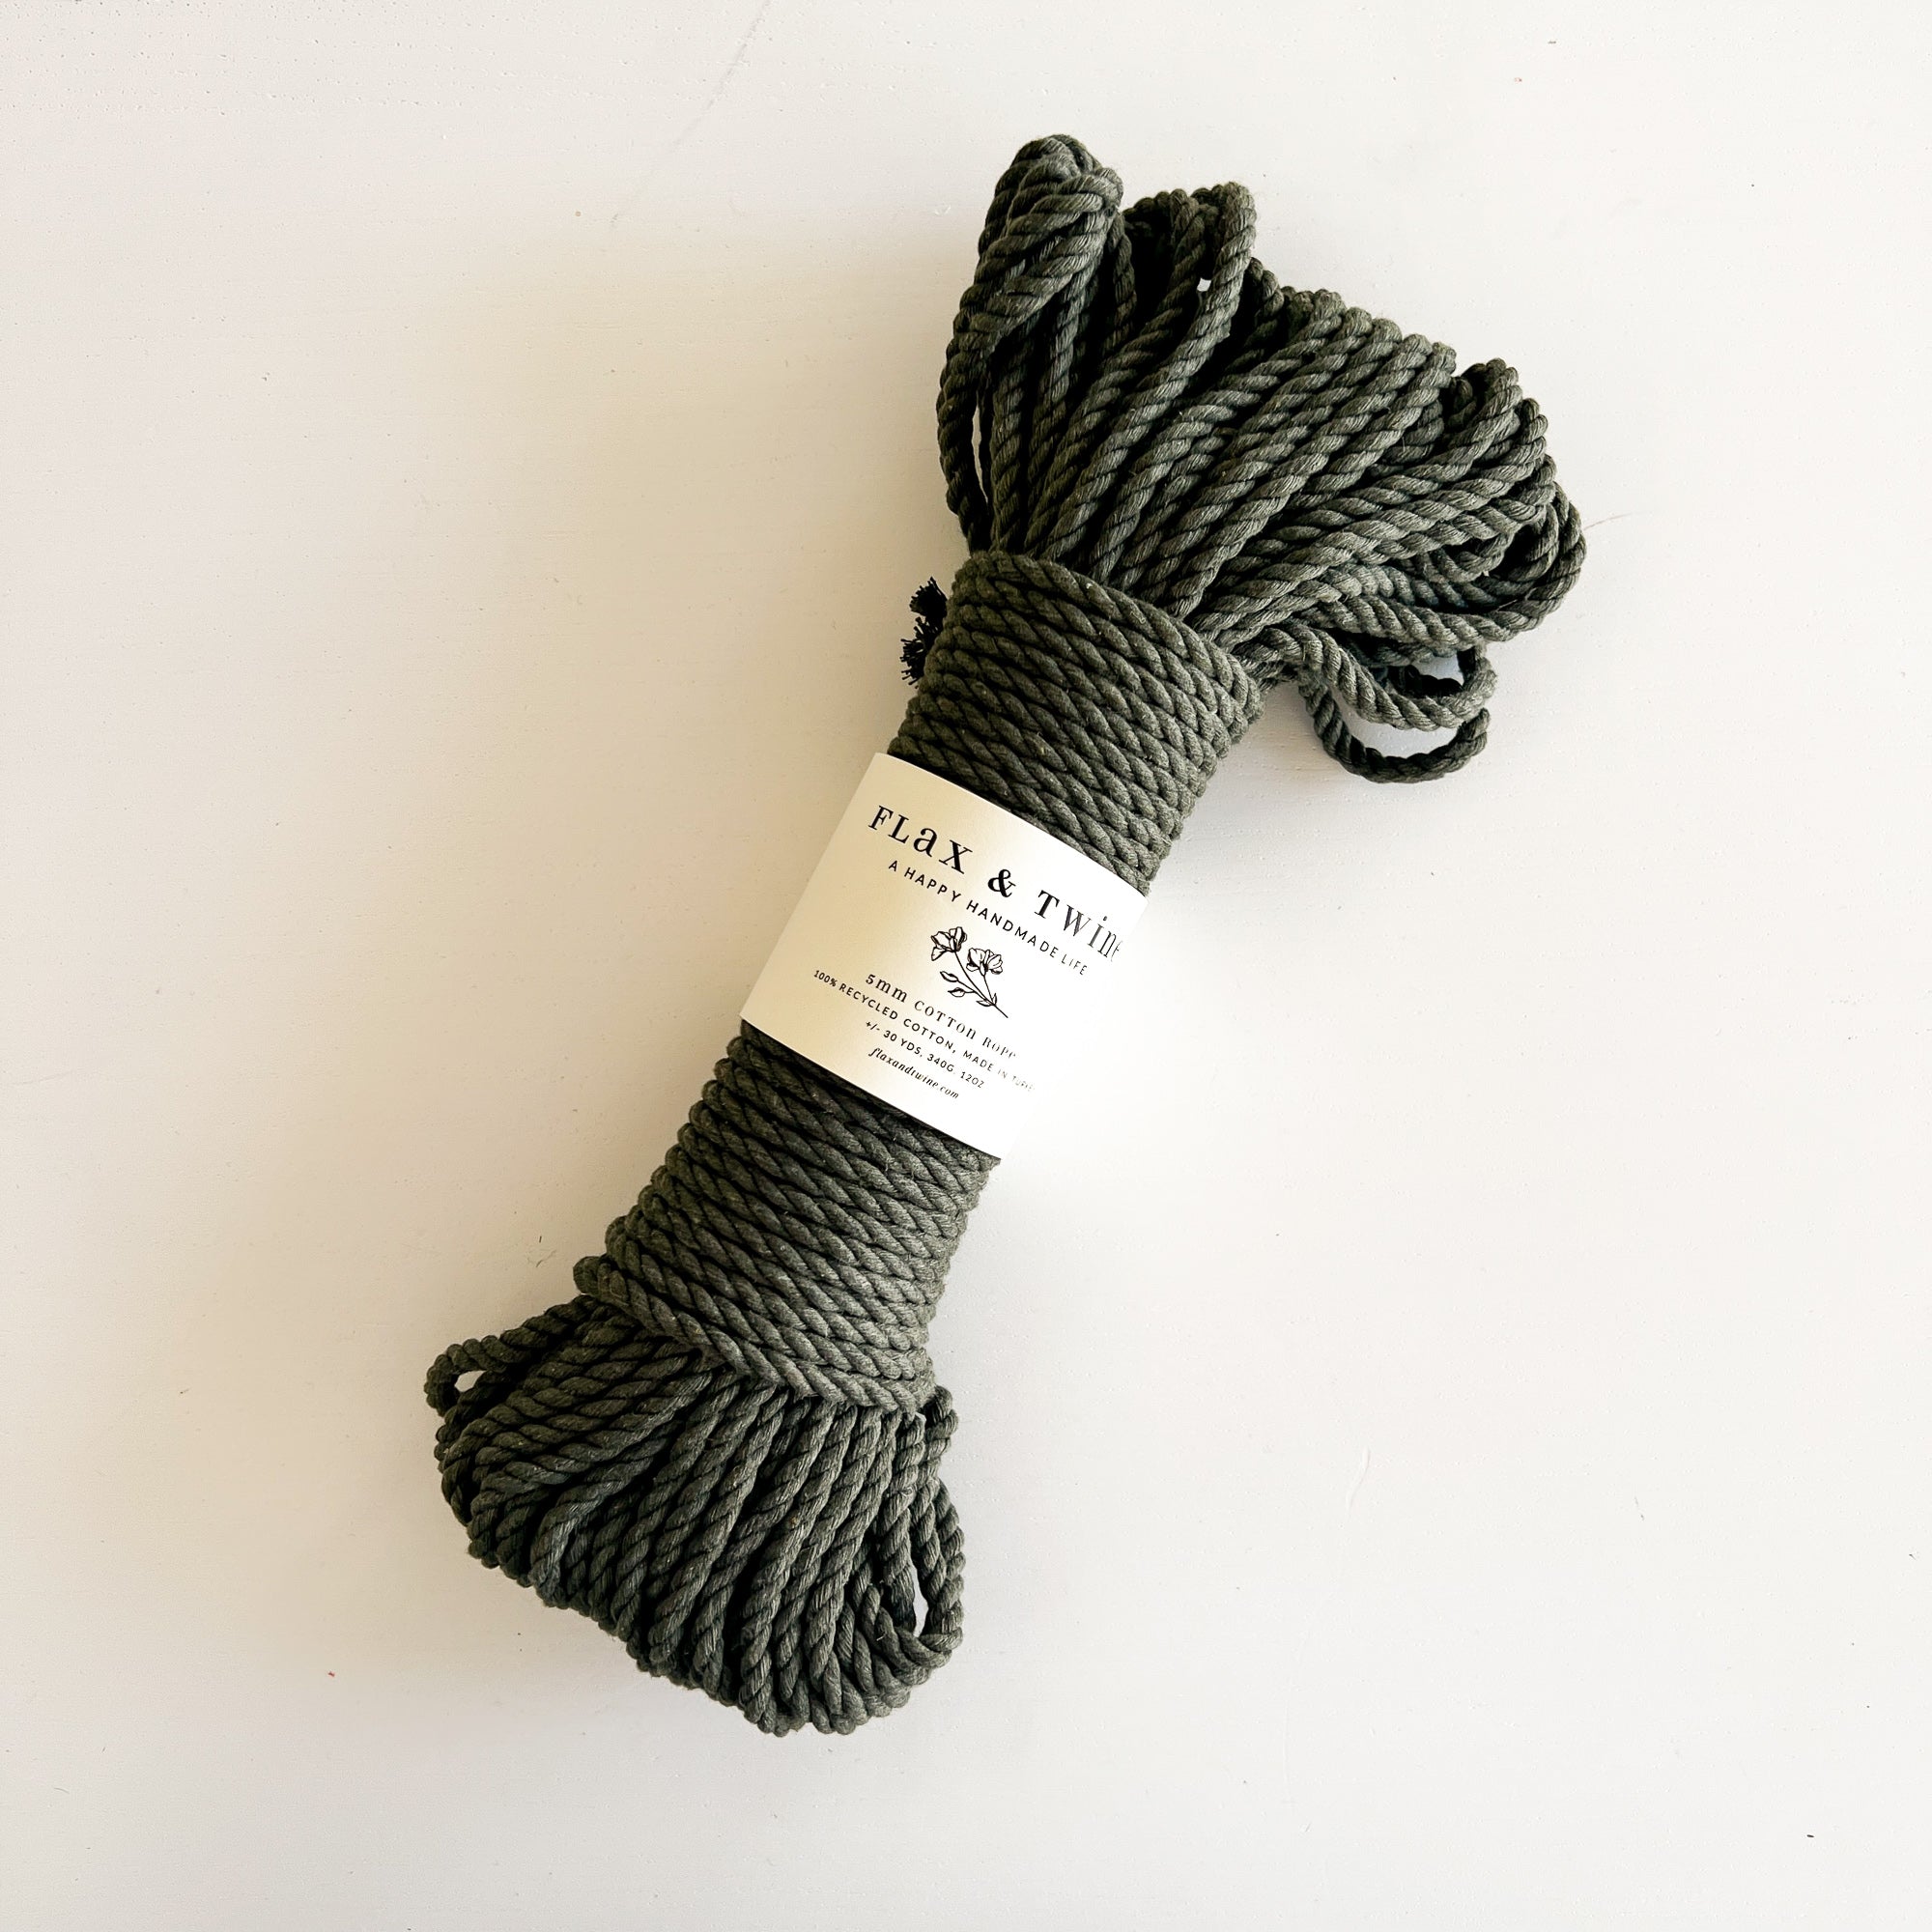 Natural Recycled Cotton Rope and String/100% Recycled Cotton  Rope/bestselling Macrame String/soft Craft String/diy Macrame/ Weaving  Supplies -  Canada